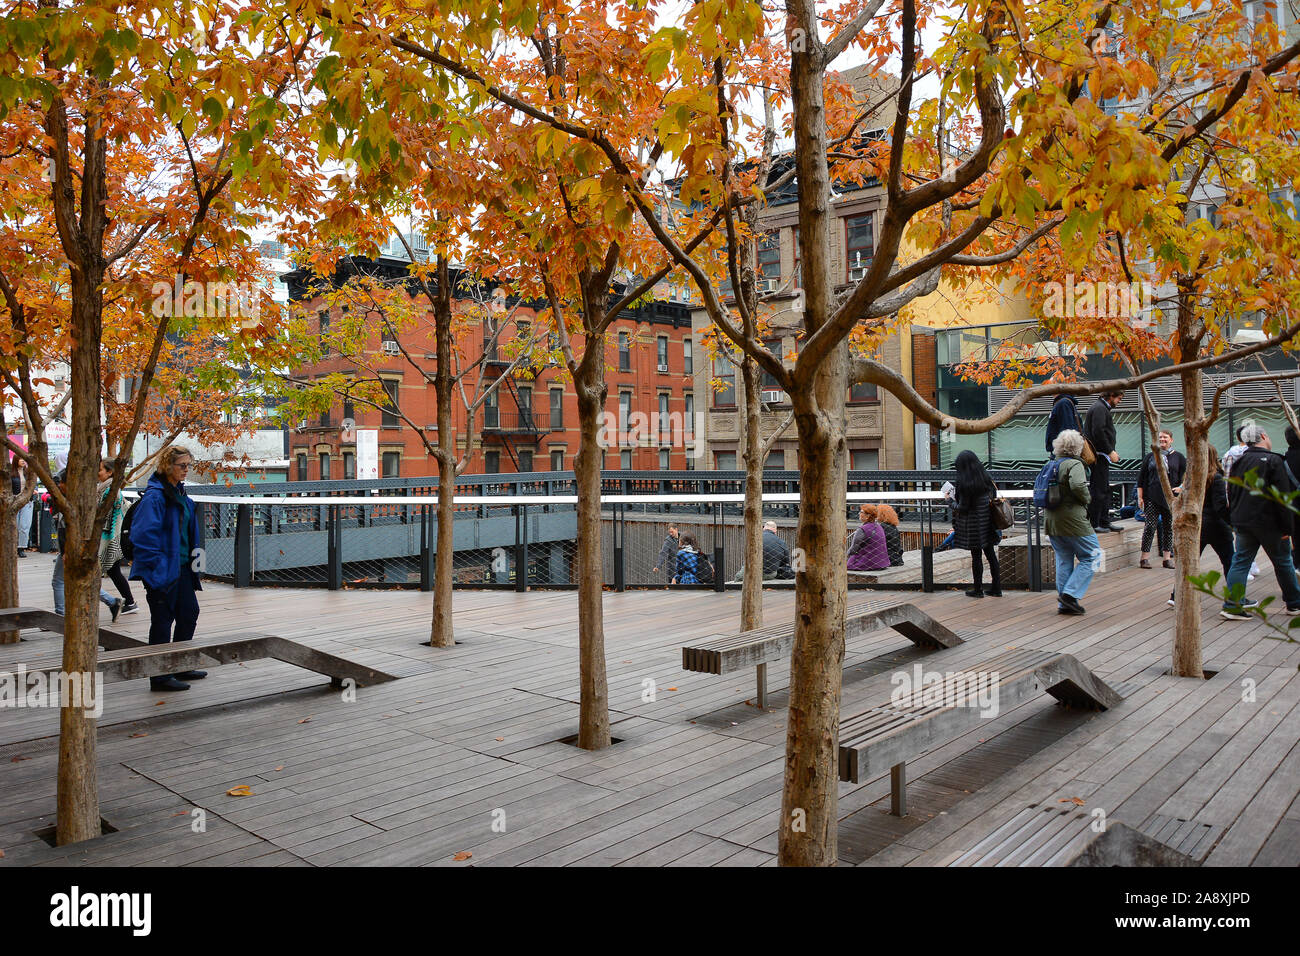 NEW YORK, NY - 05 NOV 2019: View from the High Line at the 10th Avenue Square and Overlook at 17th Street. Stock Photo